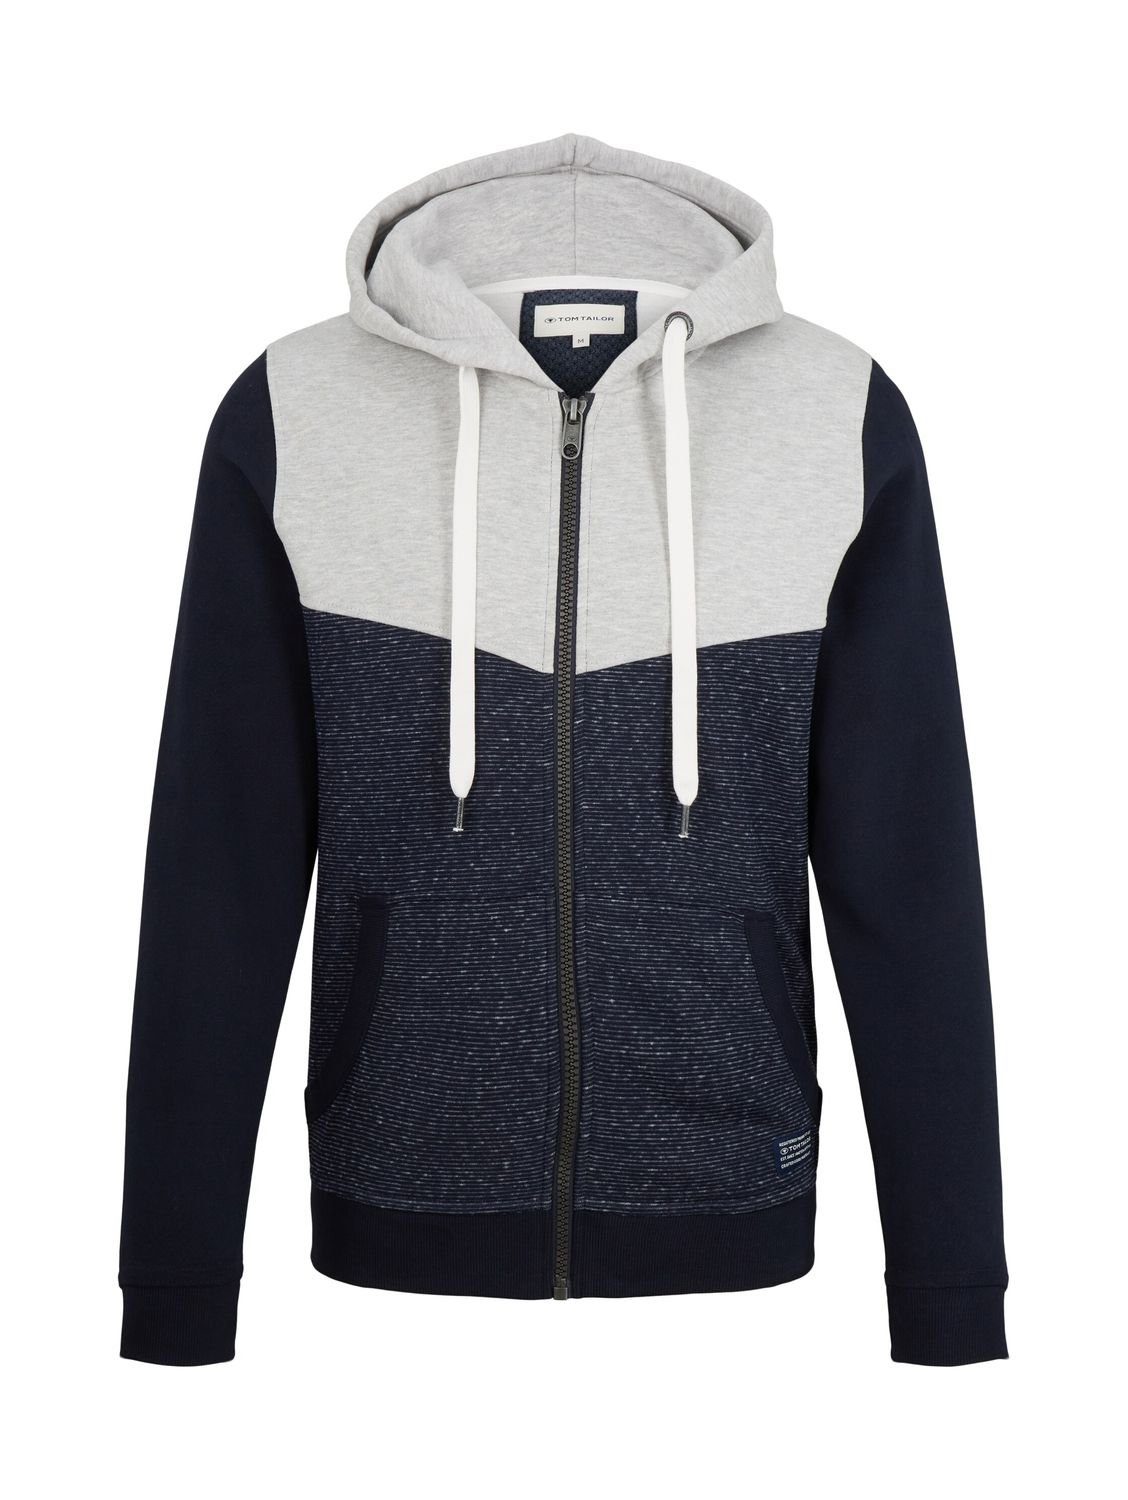 tremendous TOM TAILOR navy aus inject COLORBLOCK Baumwollmix offwhite Hoodie stripe